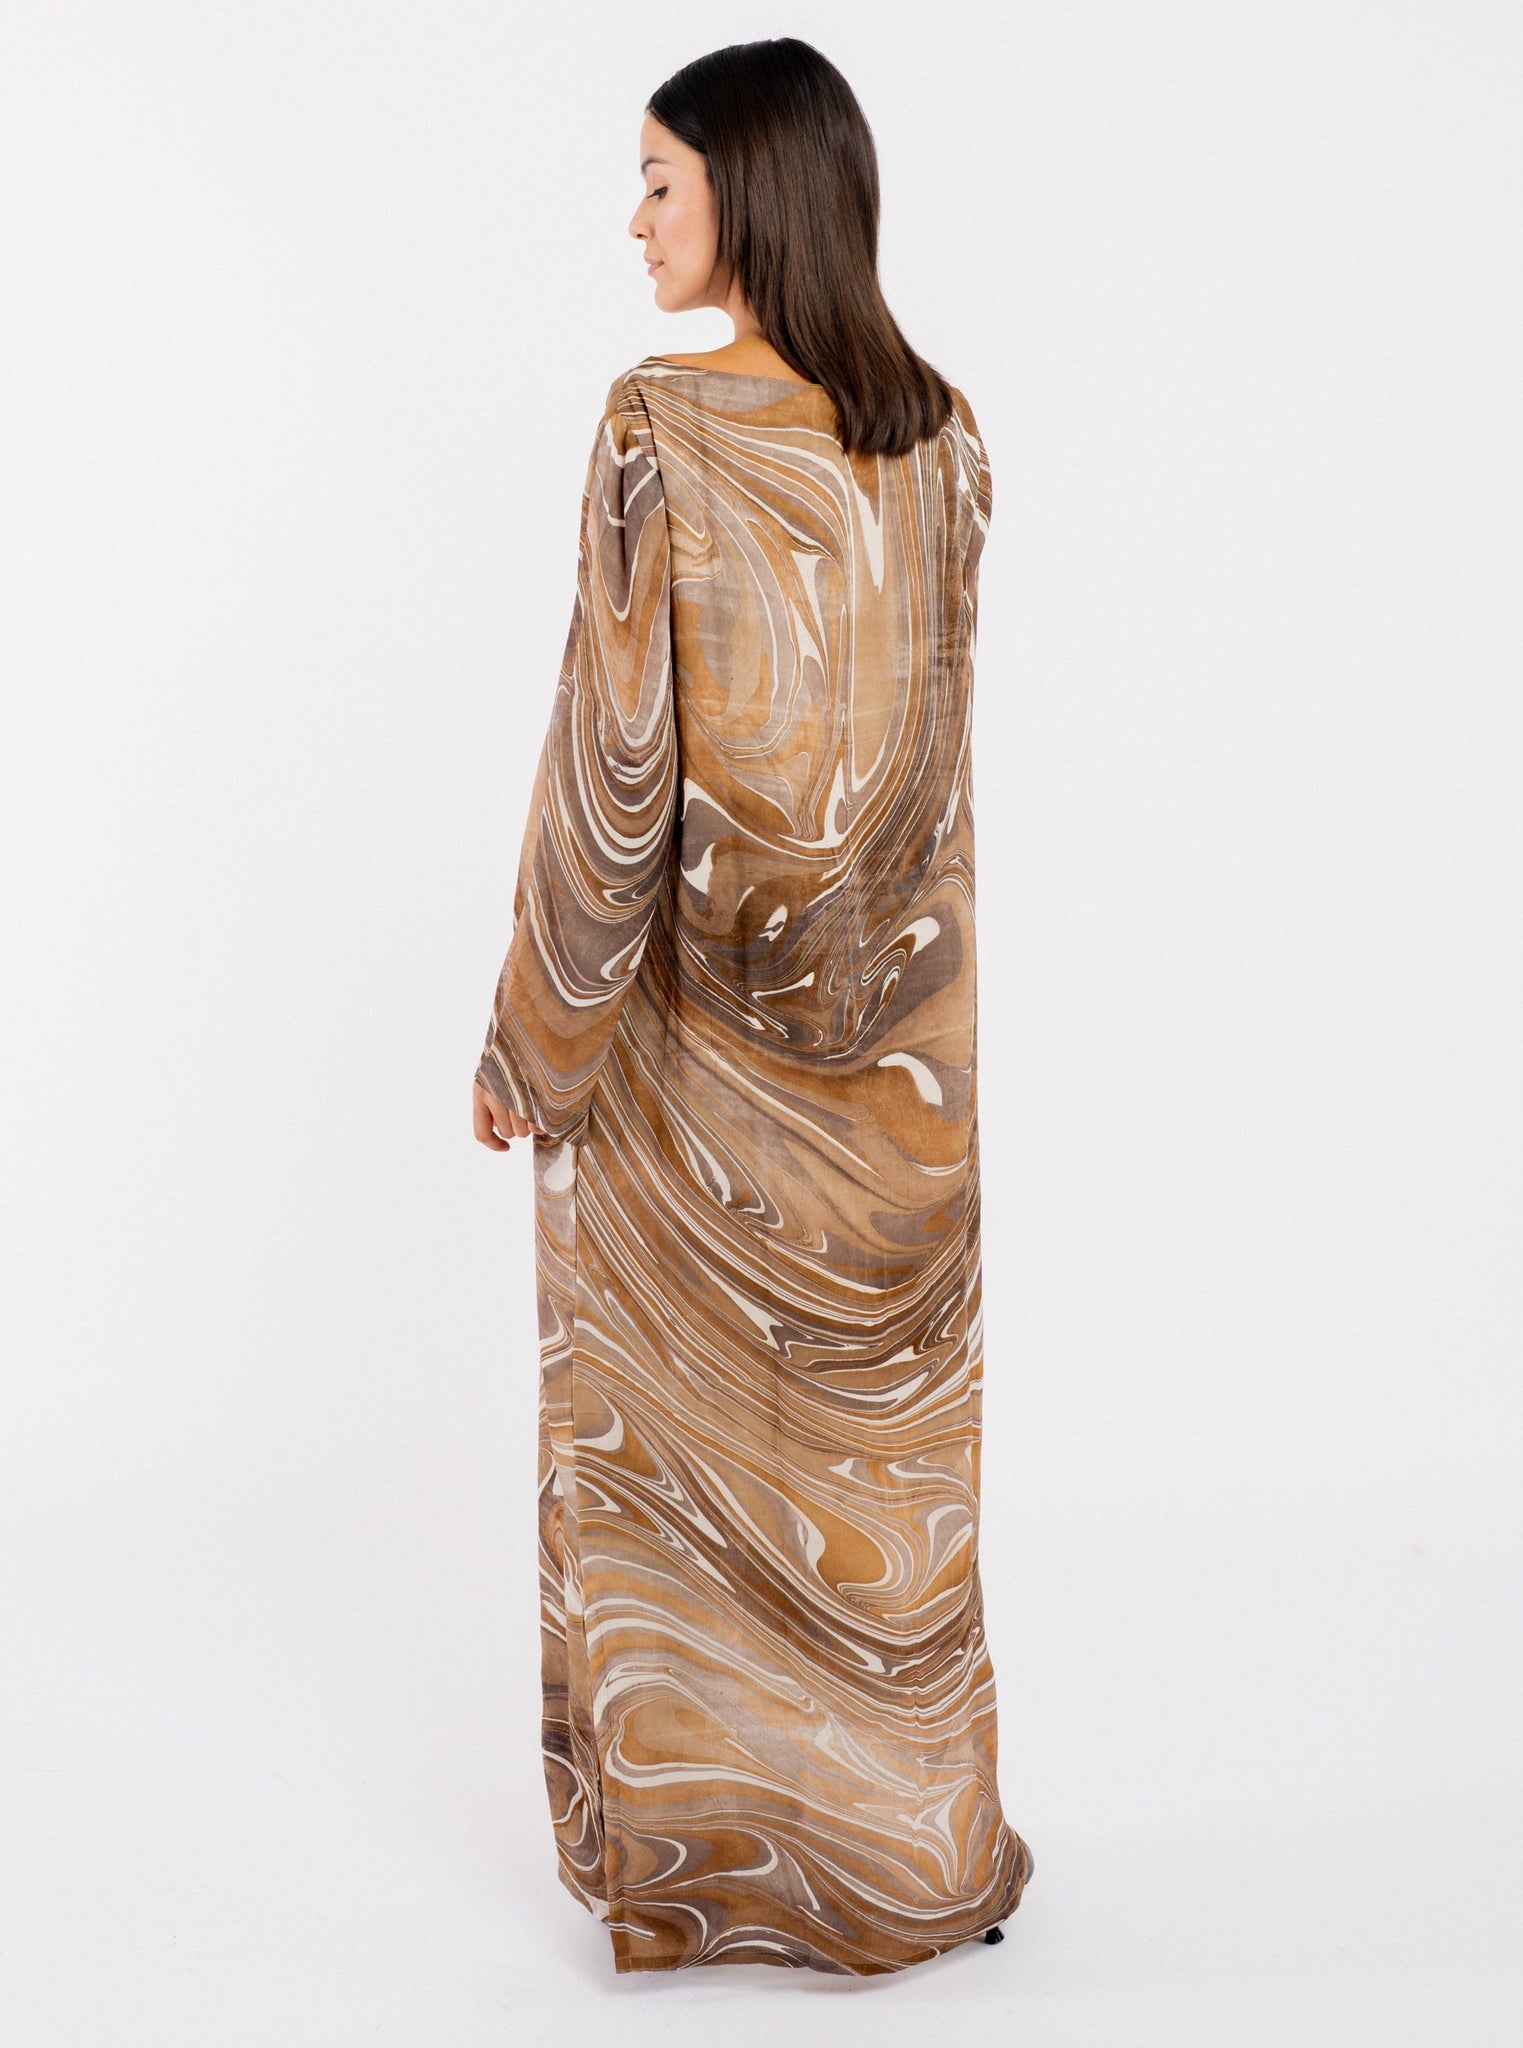 The back view of a woman wearing a long fluid maxi length Sparrow Dress - Hand Marble.